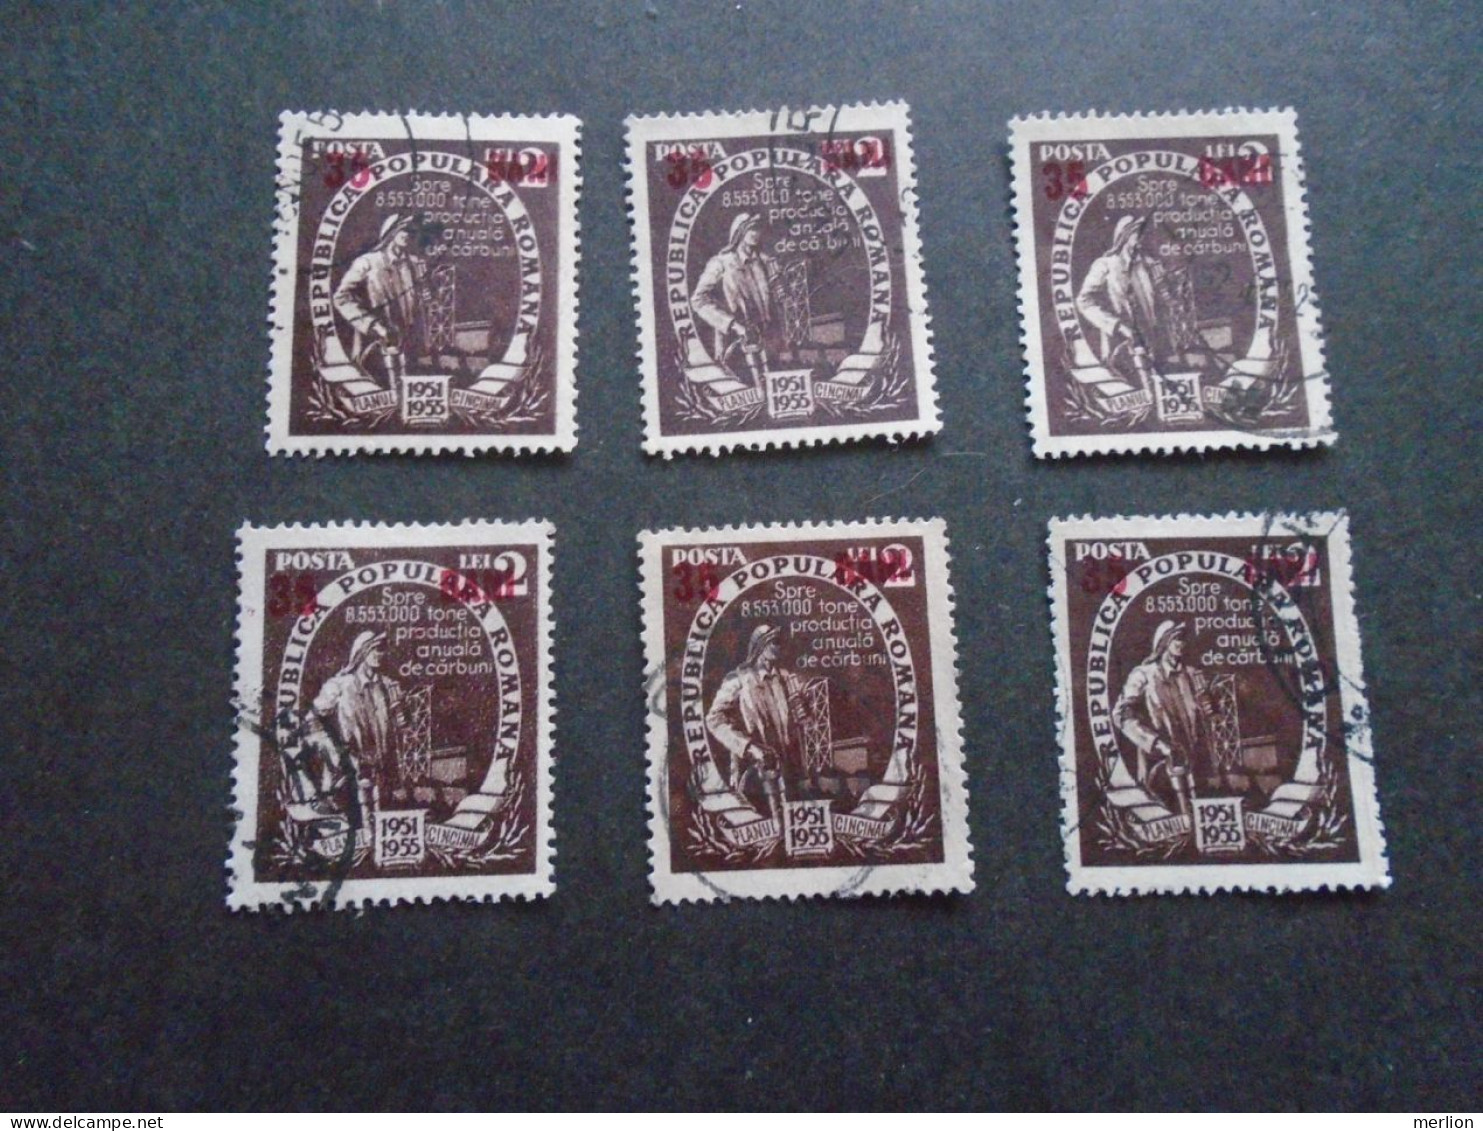 D202265   Romania  1955  - 6 Pcs Of Used Stamps  1354Y - Usado